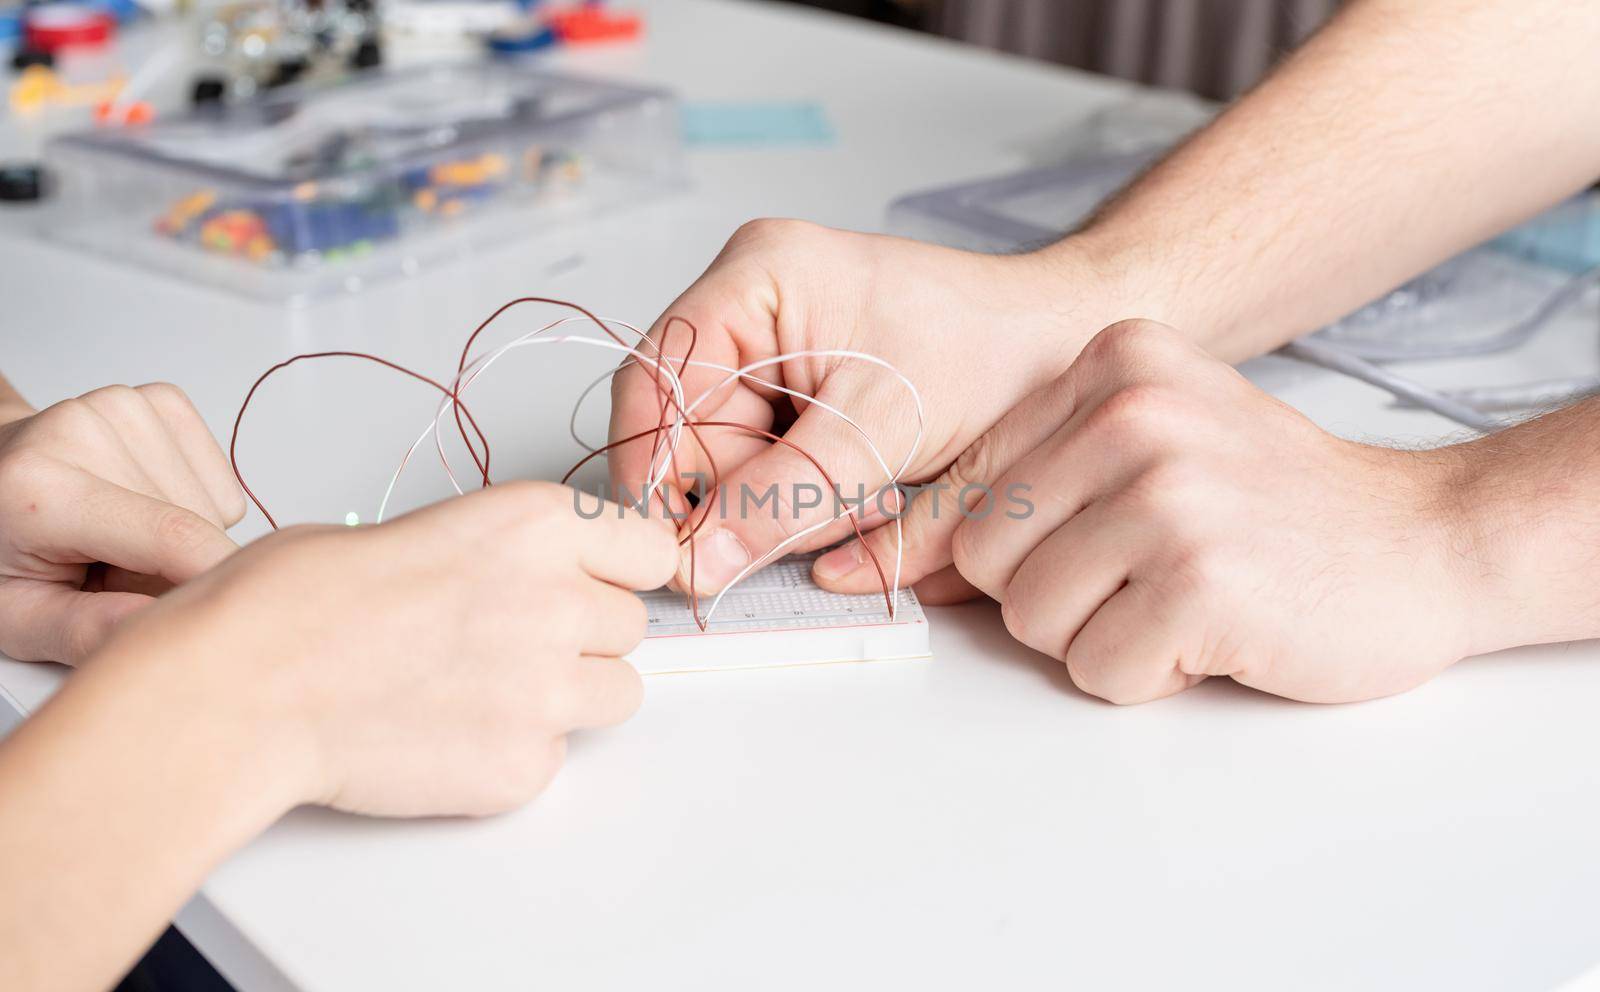 boy hands working with LED lights on experimental board for science project